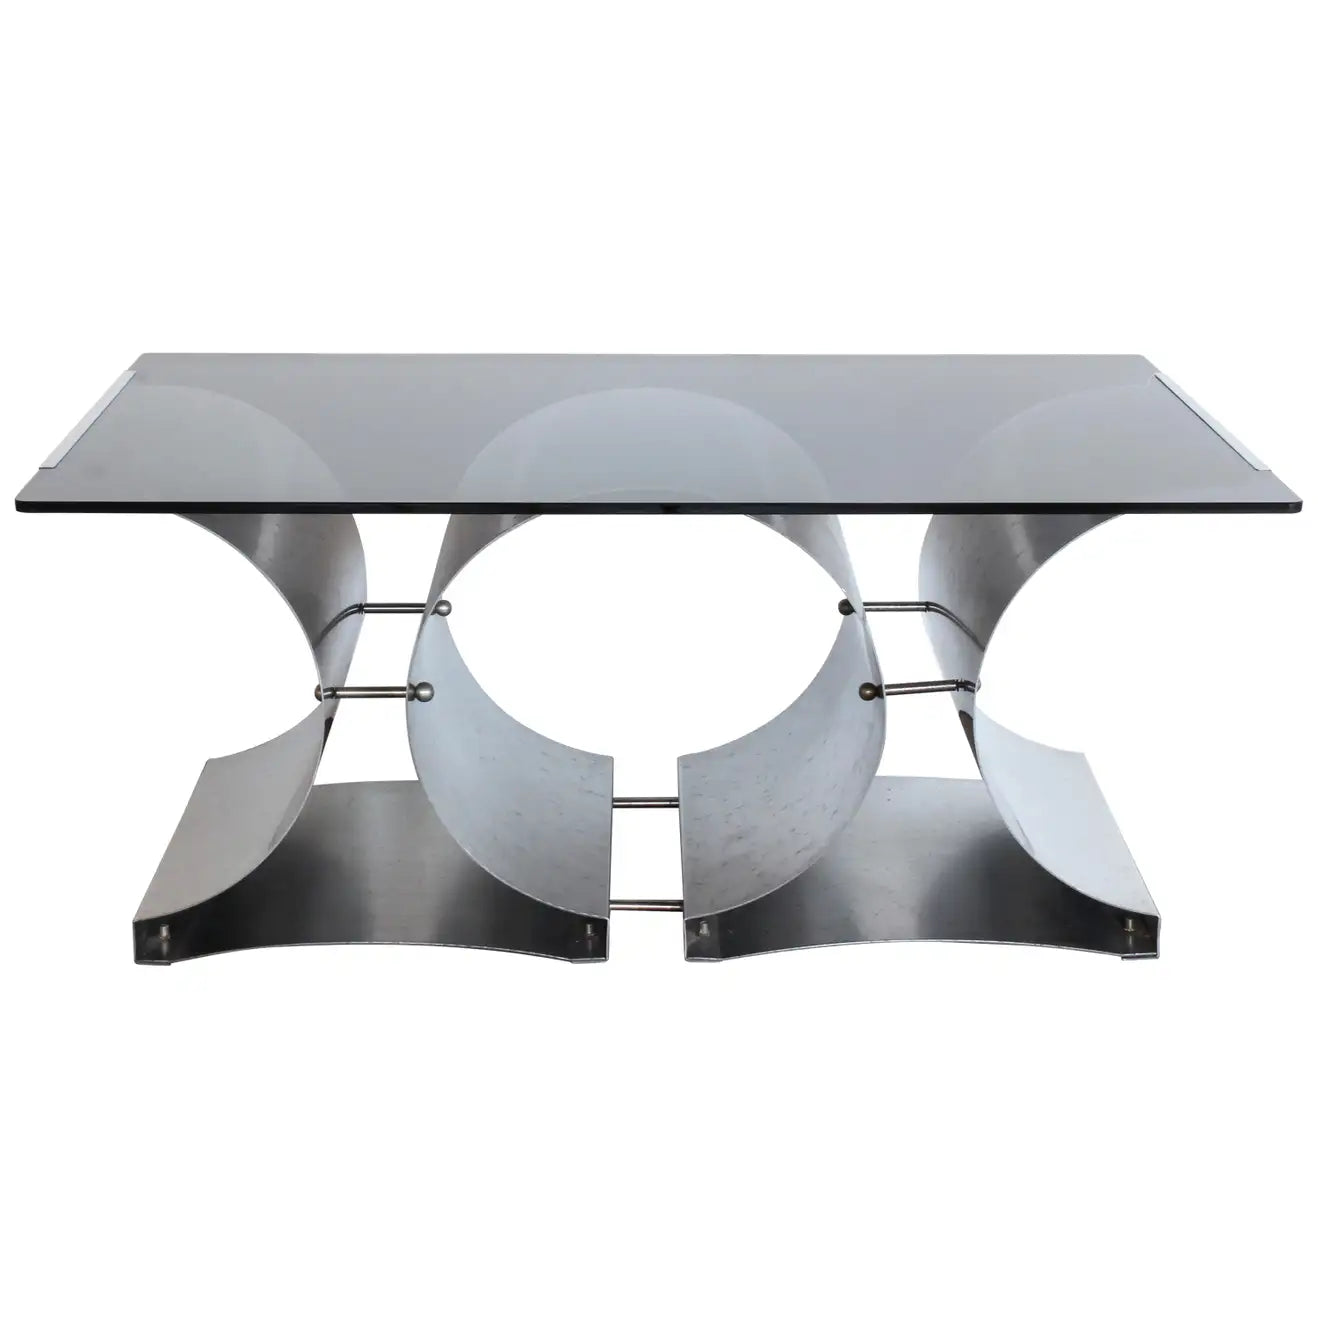 Steel and Glass Coffee Table by Francois Monnet for Kappa, French, c. 1970